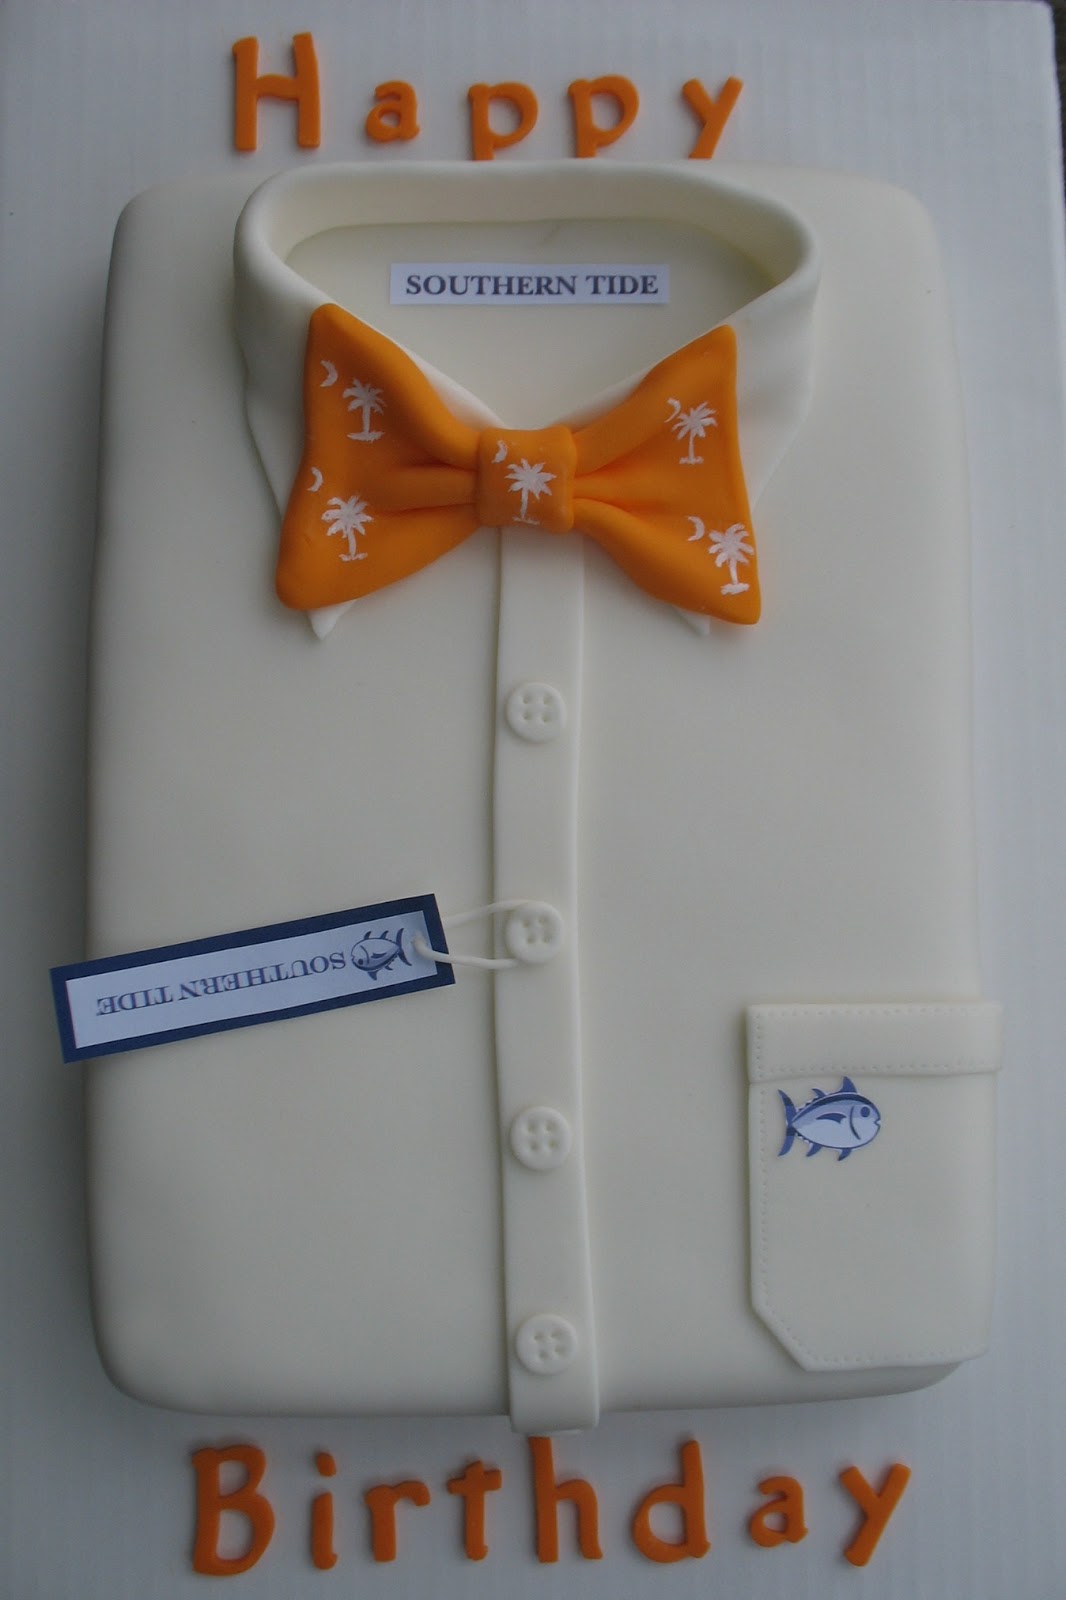 Creative Cakes by Christy: Southern Tide Shirt cake